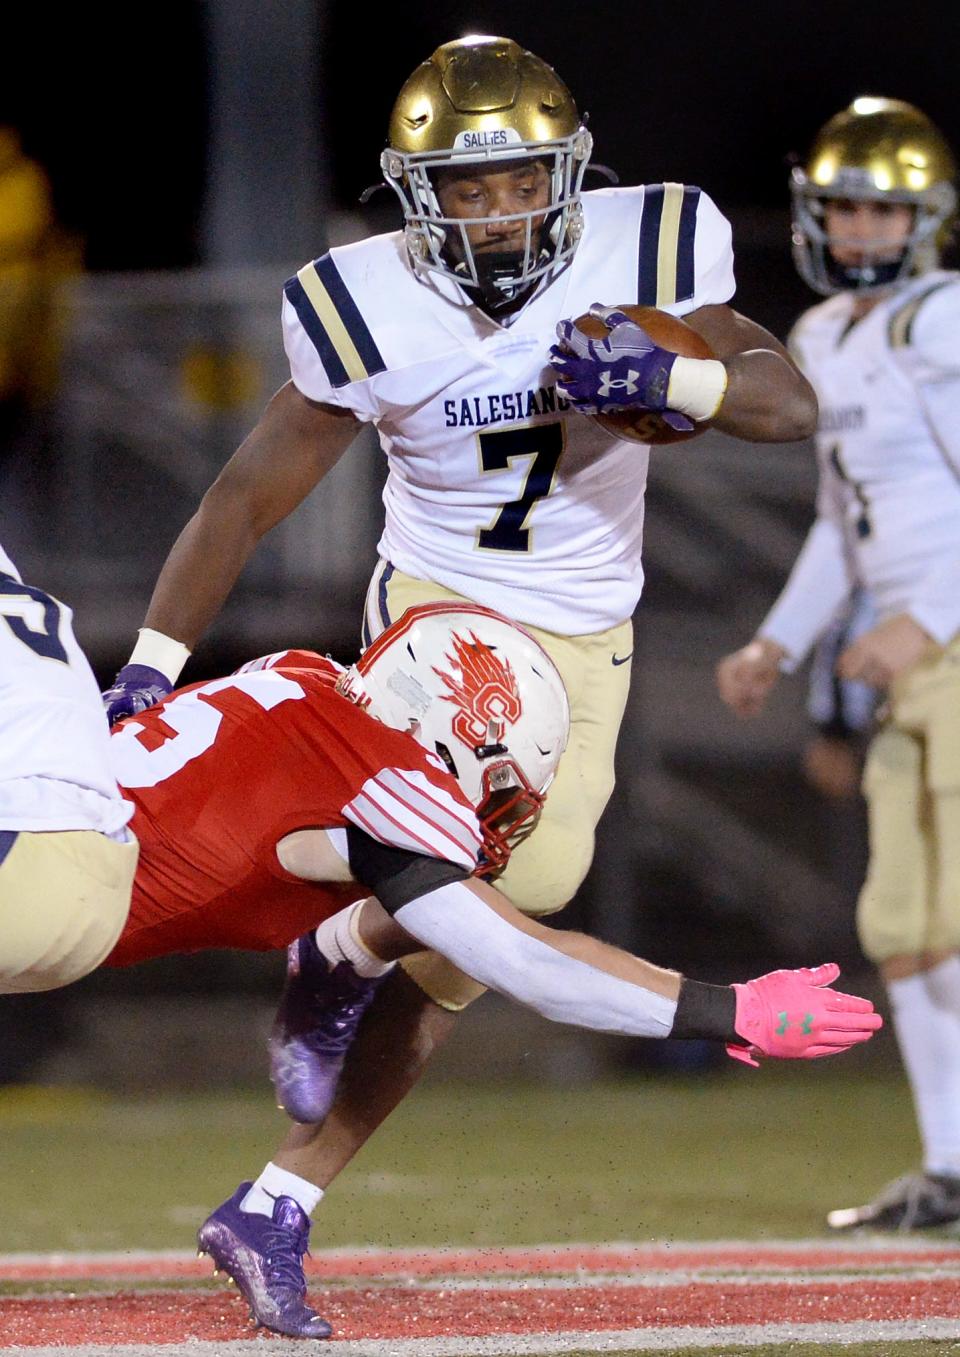 Andrew Ransome of Sallies is stopped by Smyrna's Cole Moyer.